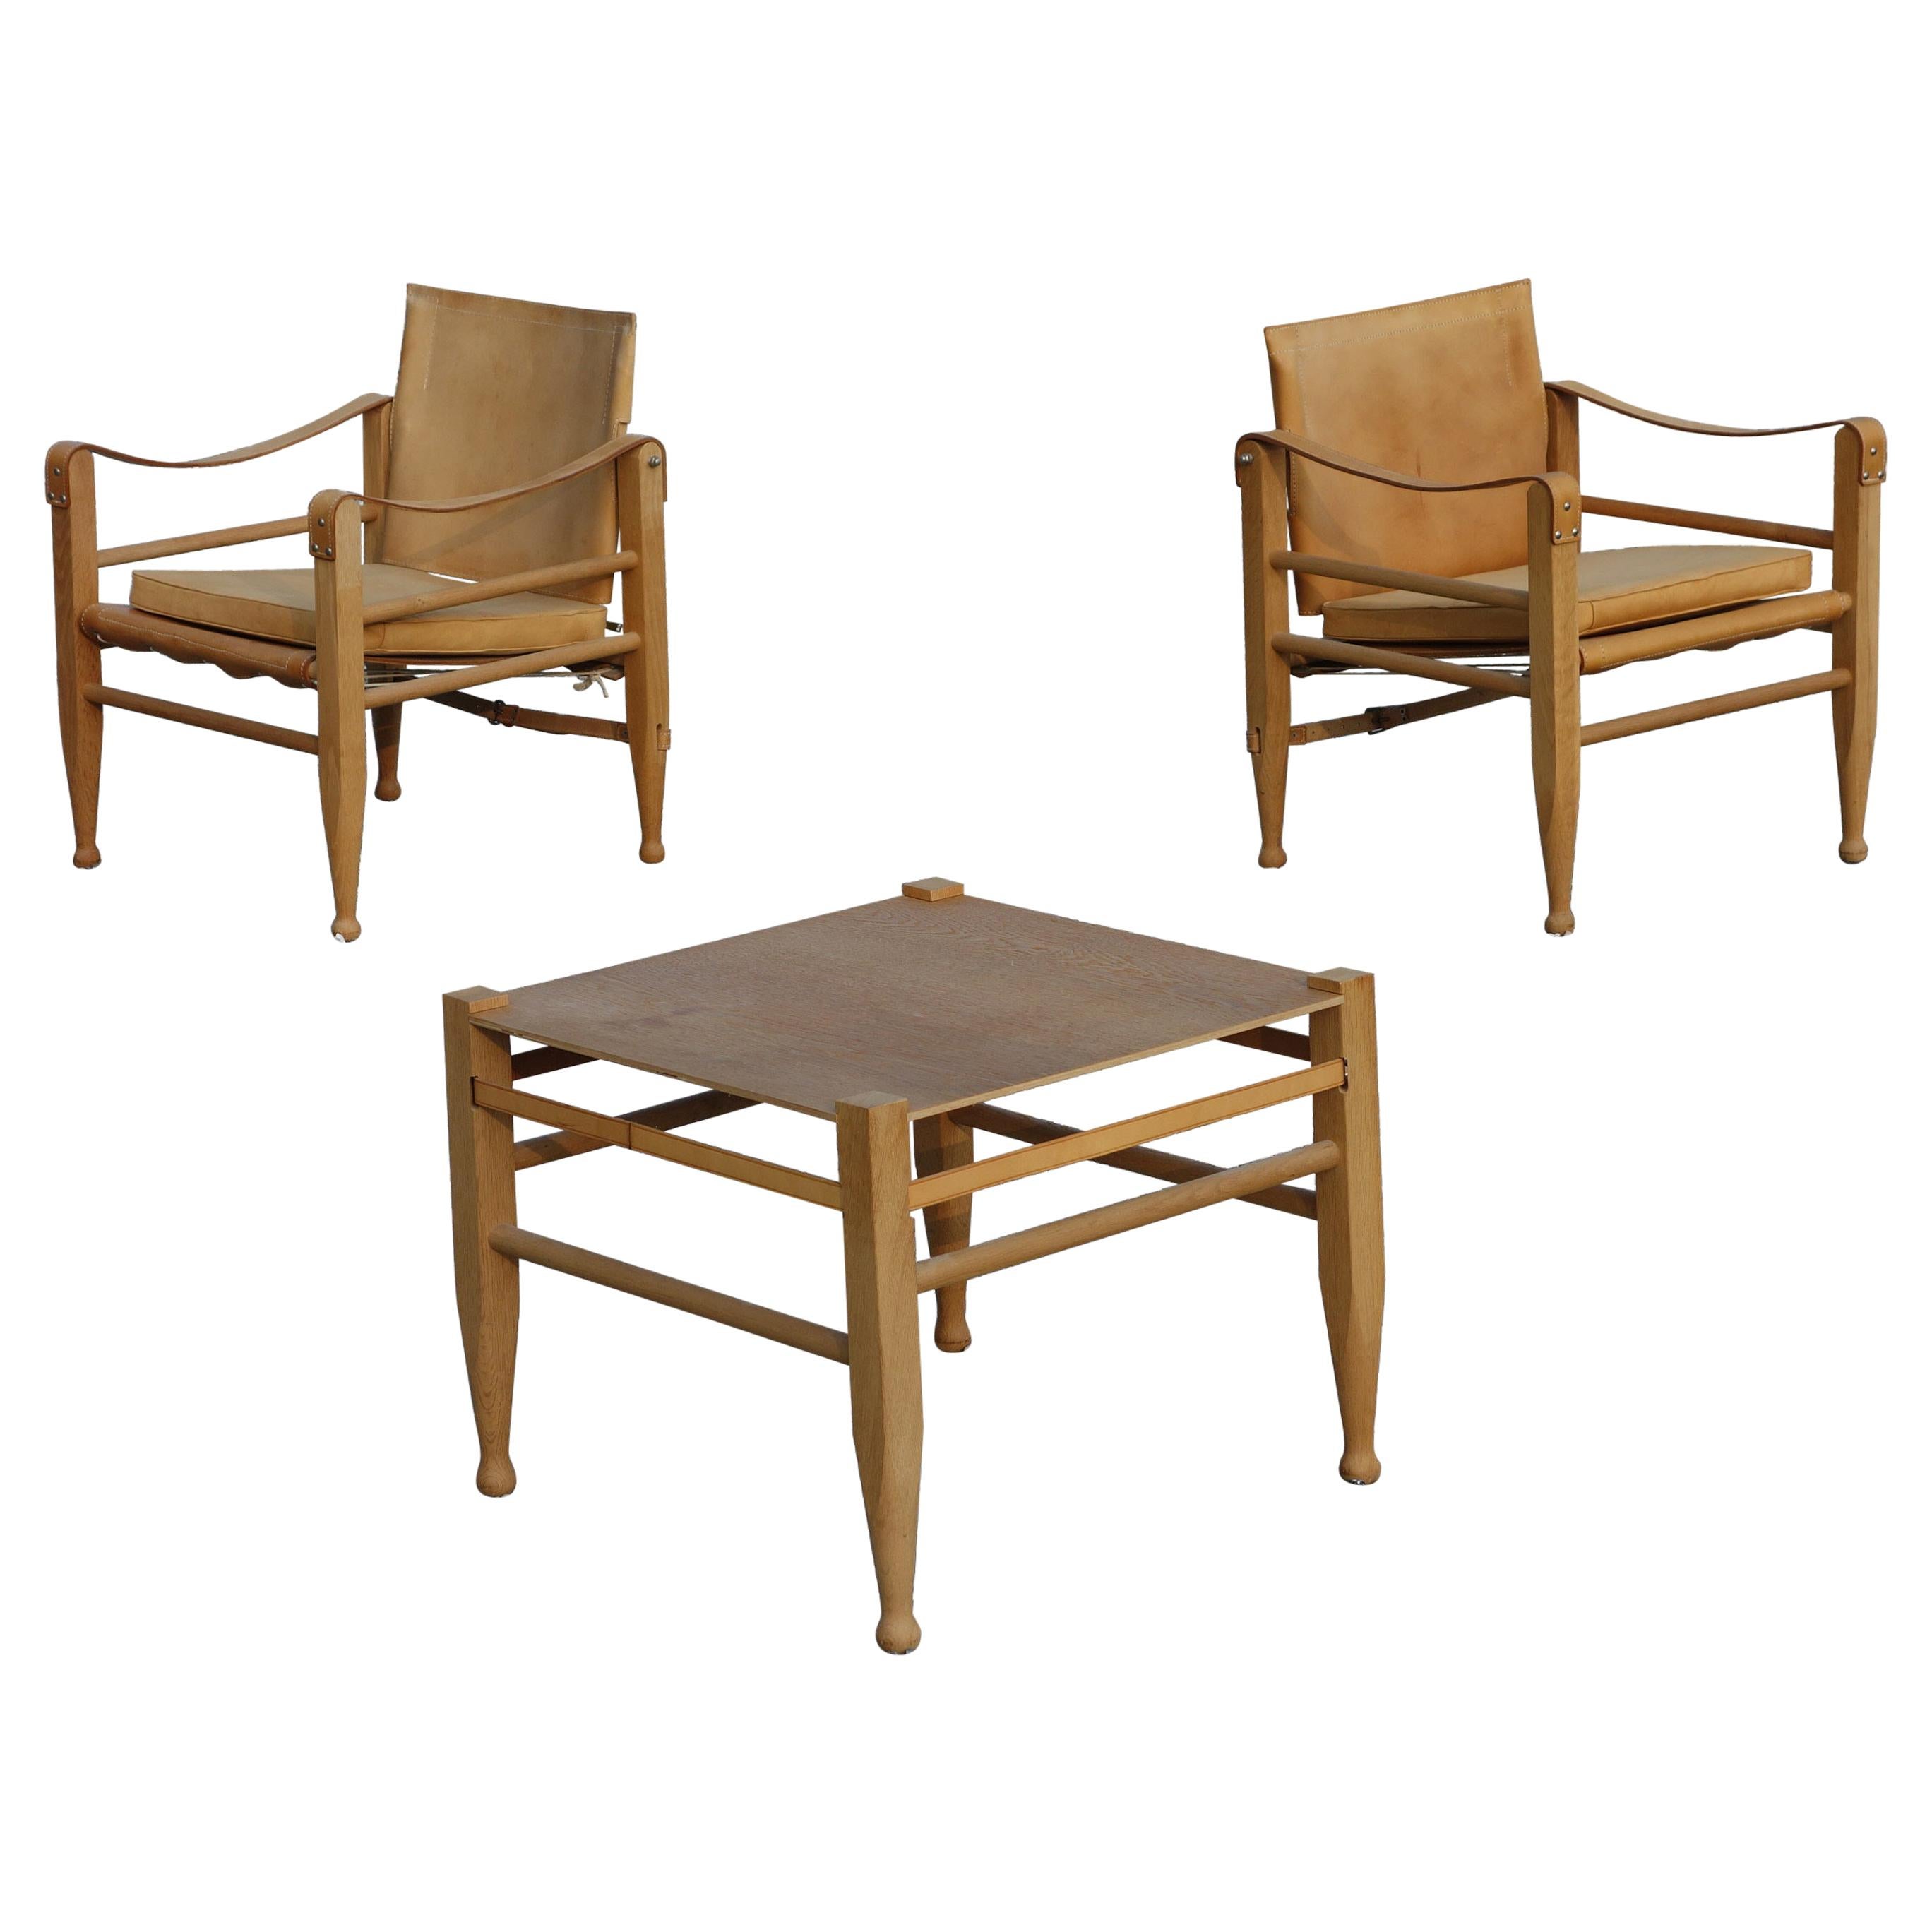 Pair of Danish Oxhide Safari Chairs Kaare Klint Style from 1970 For Sale